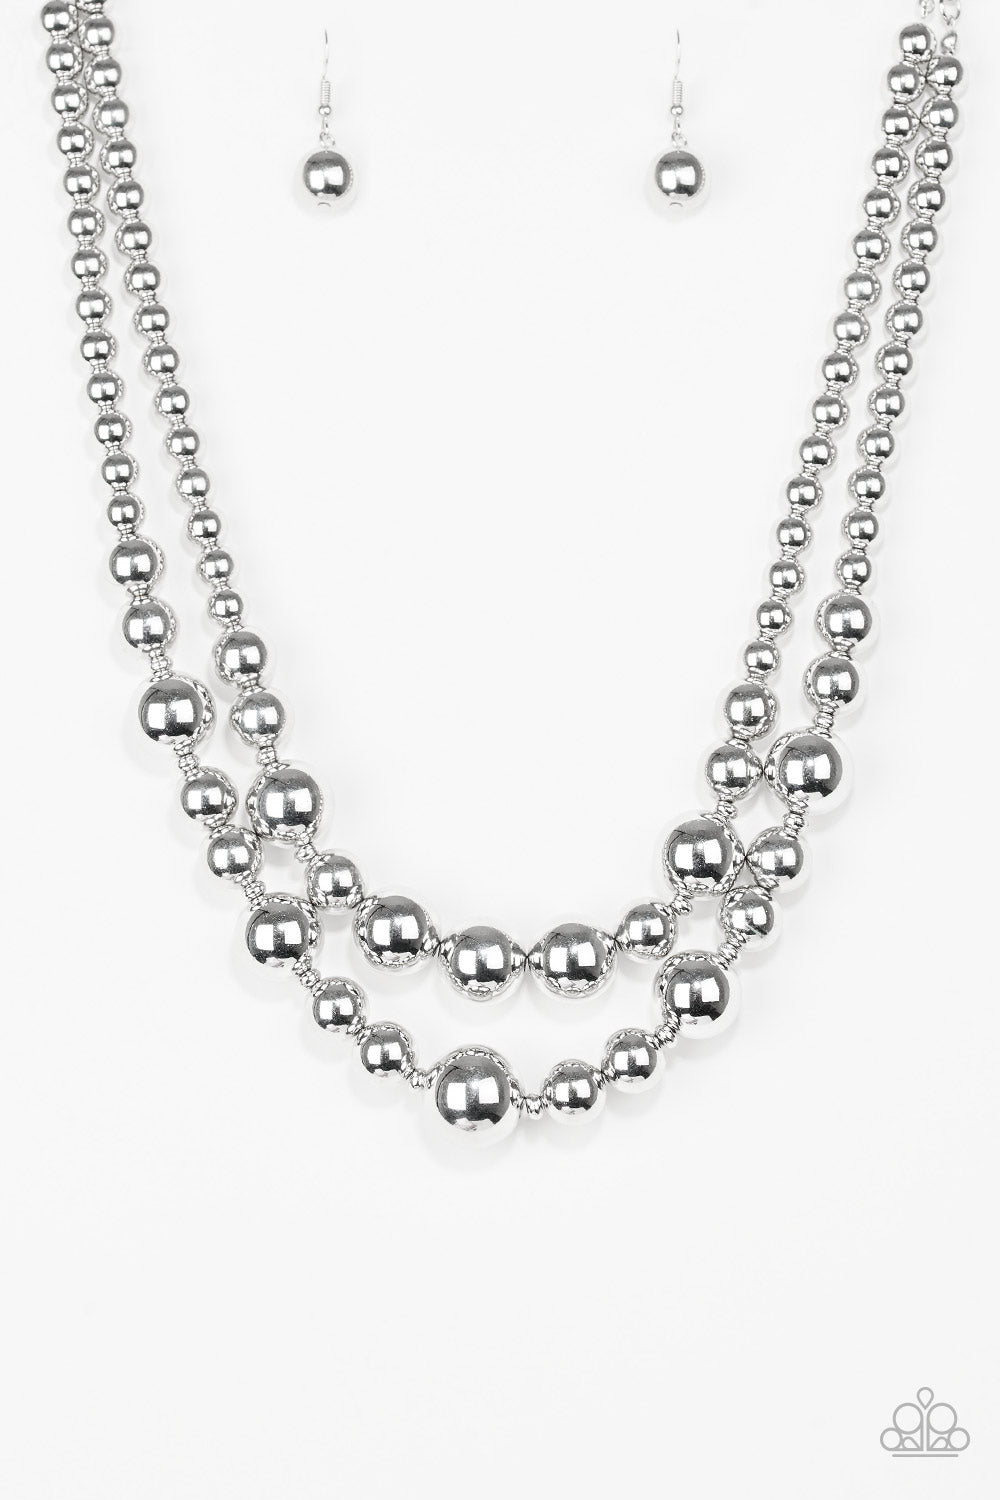 I Double Dare You - Silver necklace